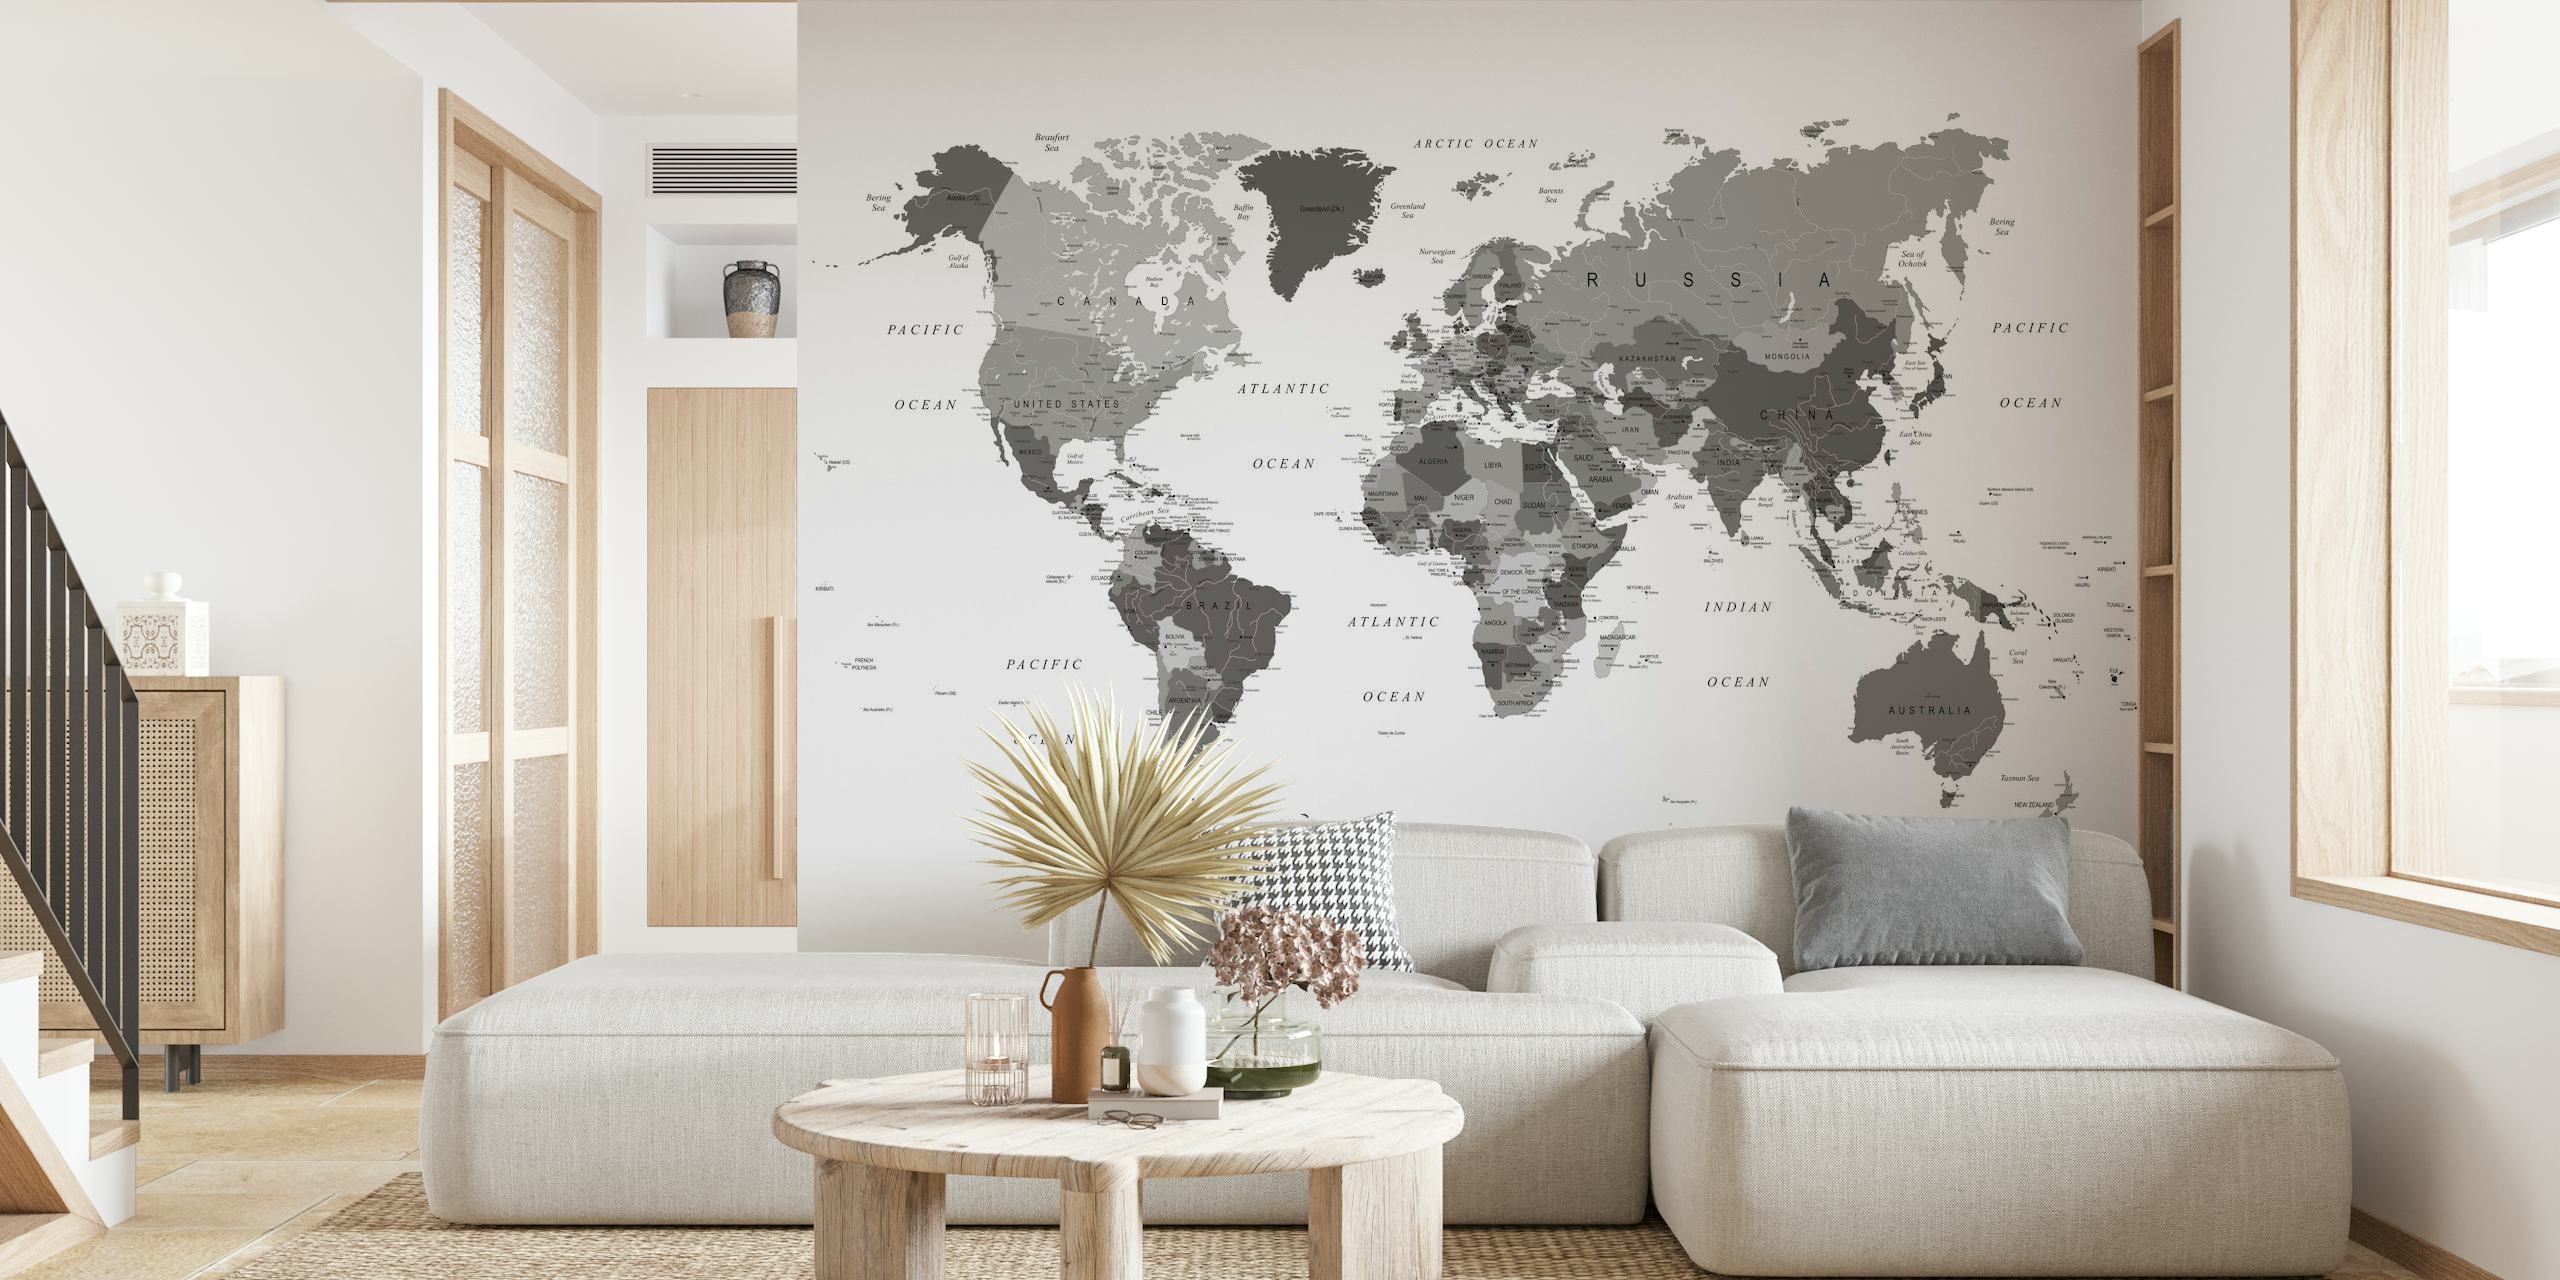 Sophisticated Monochrome World Map Wallpaper, featuring countries, cities, and oceans